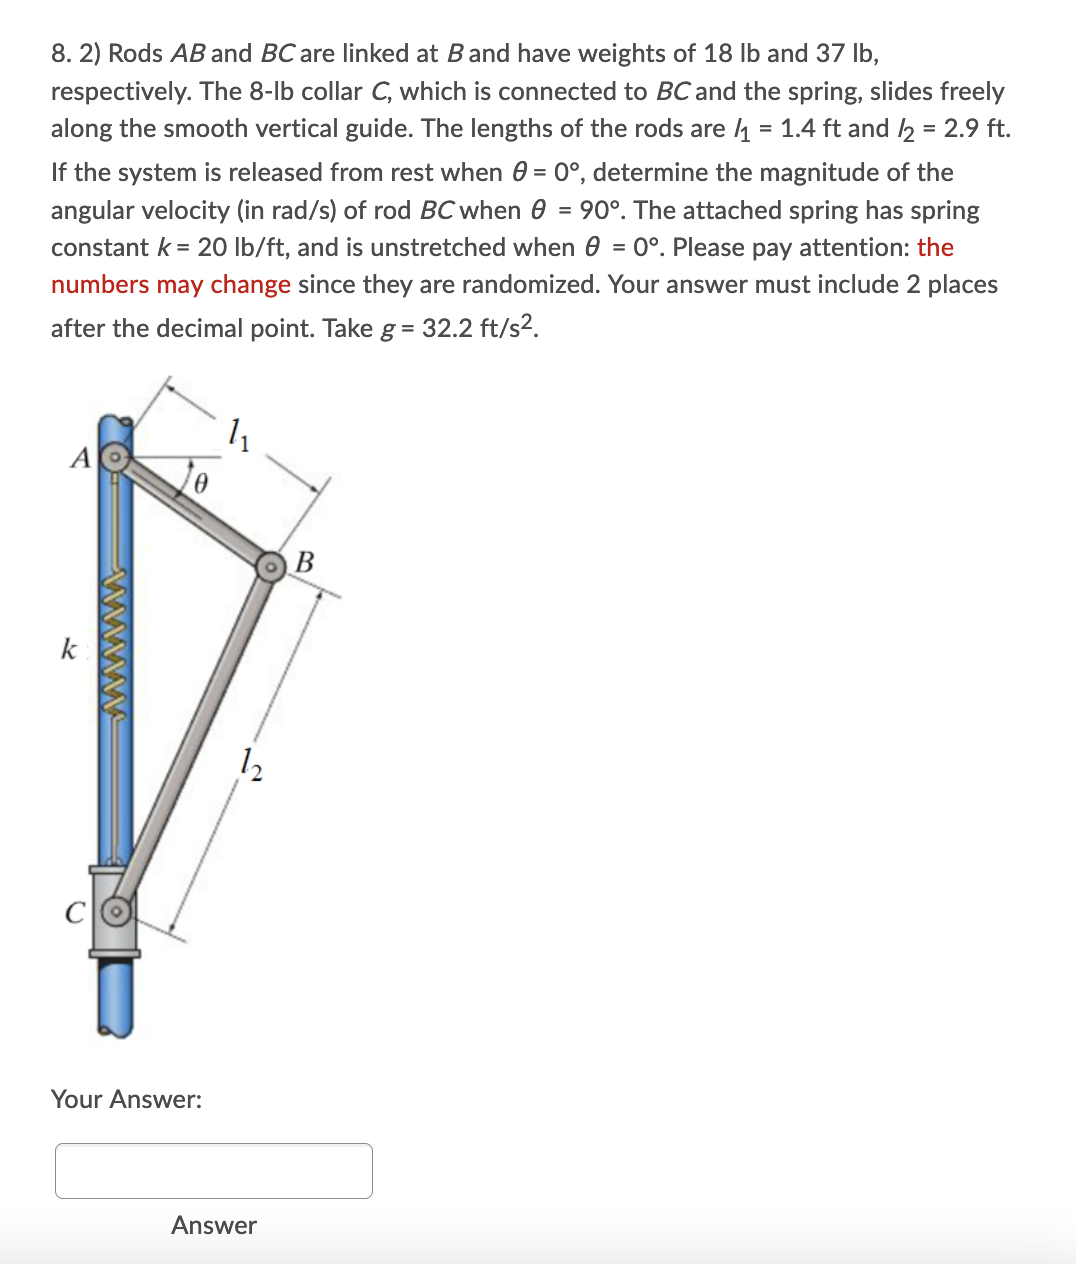 8. 2) Rods AB and BC are linked at Band have weights of 18 lb and 37 lb,
respectively. The 8-lb collar C, which is connected to BC and the spring, slides freely
along the smooth vertical guide. The lengths of the rods are 4 = 1.4 ft and 2 = 2.9 ft.
If the system is released from rest when 0 = 0°, determine the magnitude of the
angular velocity (in rad/s) of rod BC when 0 = 90°. The attached spring has spring
constant k = 20 Ib/ft, and is unstretched when 0 = 0°. Please pay attention: the
numbers may change since they are randomized. Your answer must include 2 places
after the decimal point. Take g= 32.2 ft/s2.
k
CO
Your Answer:
Answer
